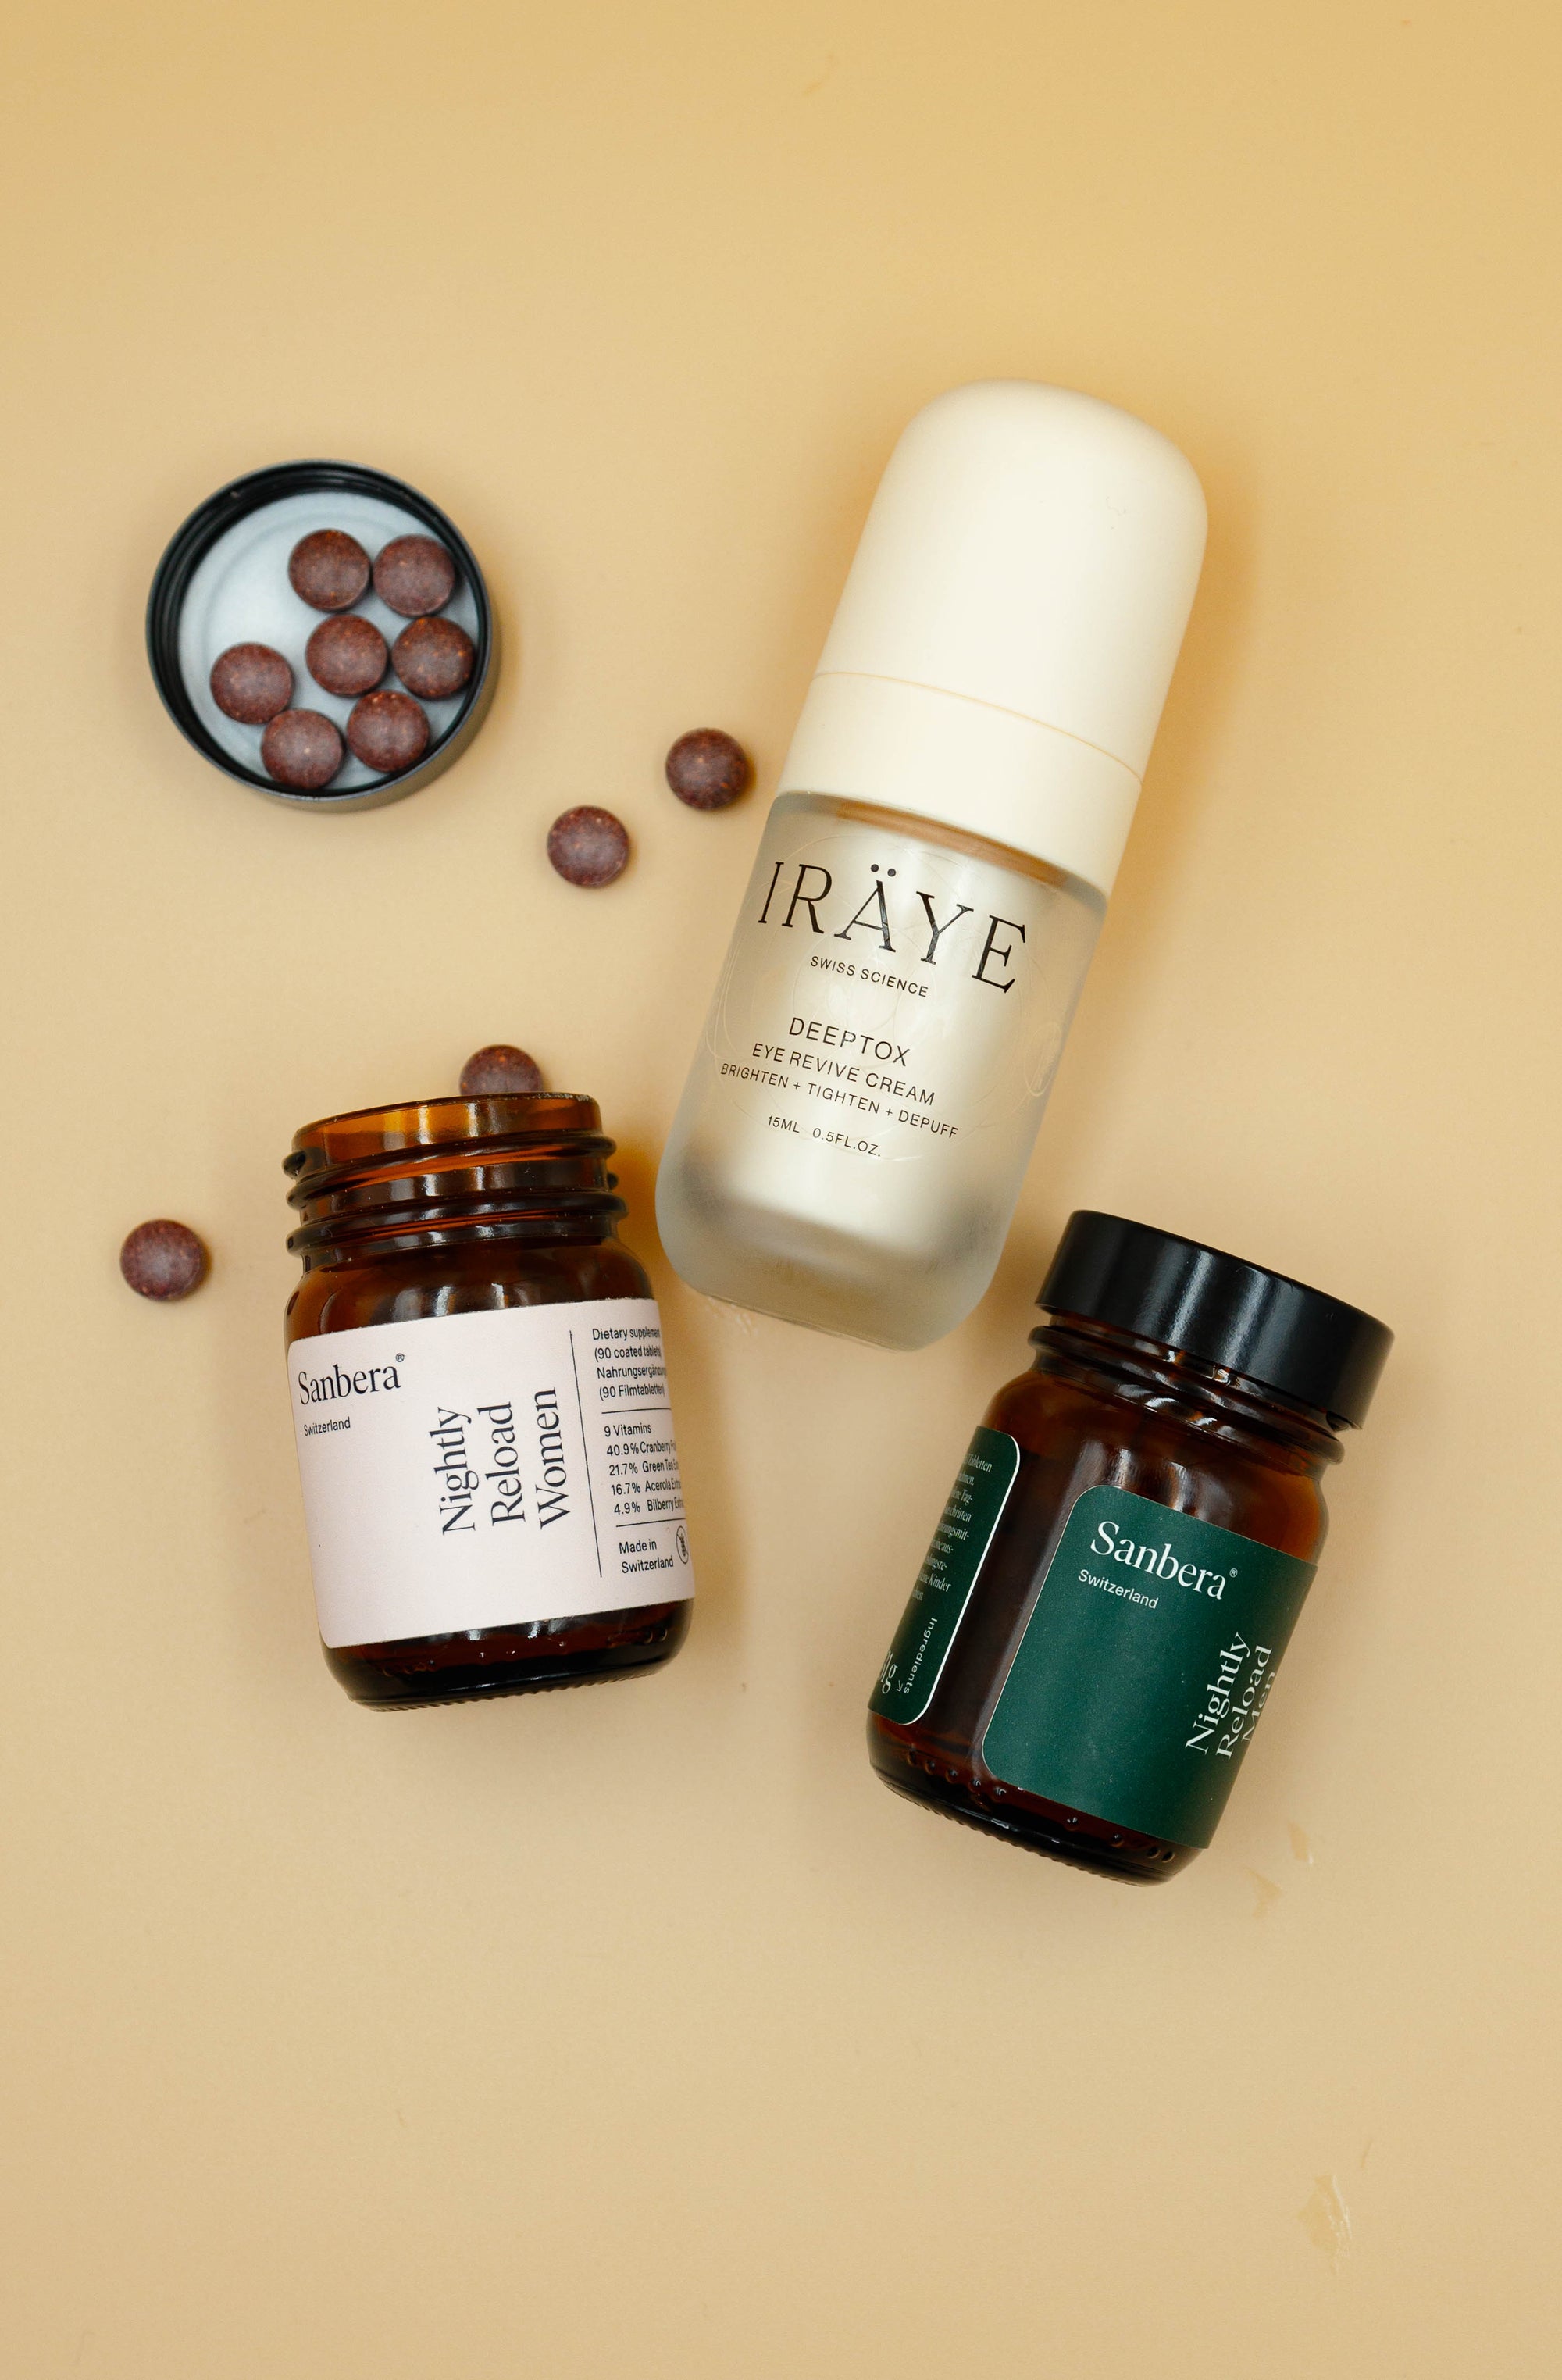 Upgrade Your Beauty Sleep with our Nightly Reloads & Eye Revive Cream by Iräye